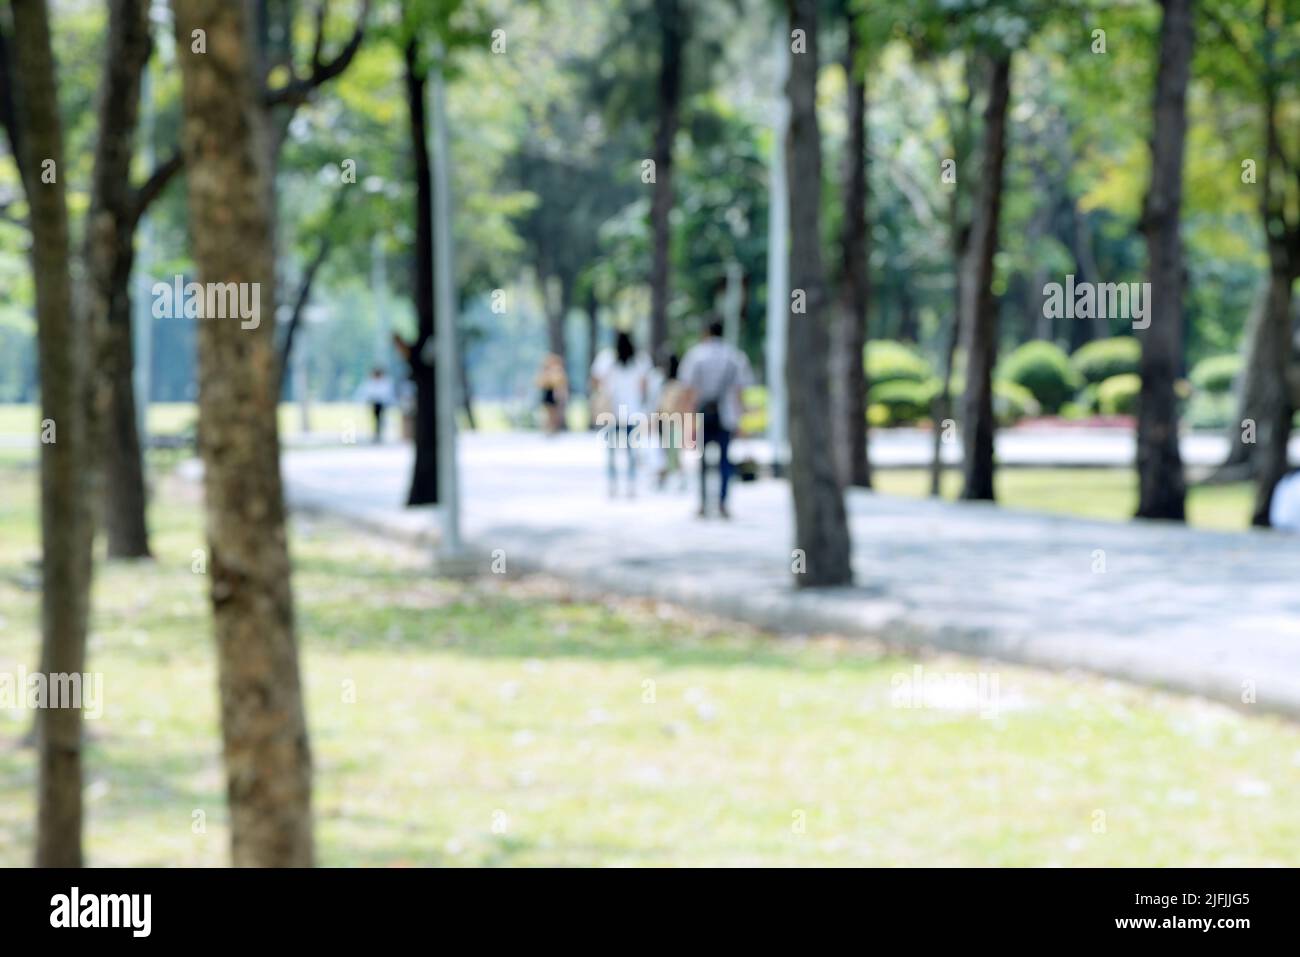 Blurred image of urban nature park shows the way people live in the eco-town concept and sustainable quality of life. Stock Photo